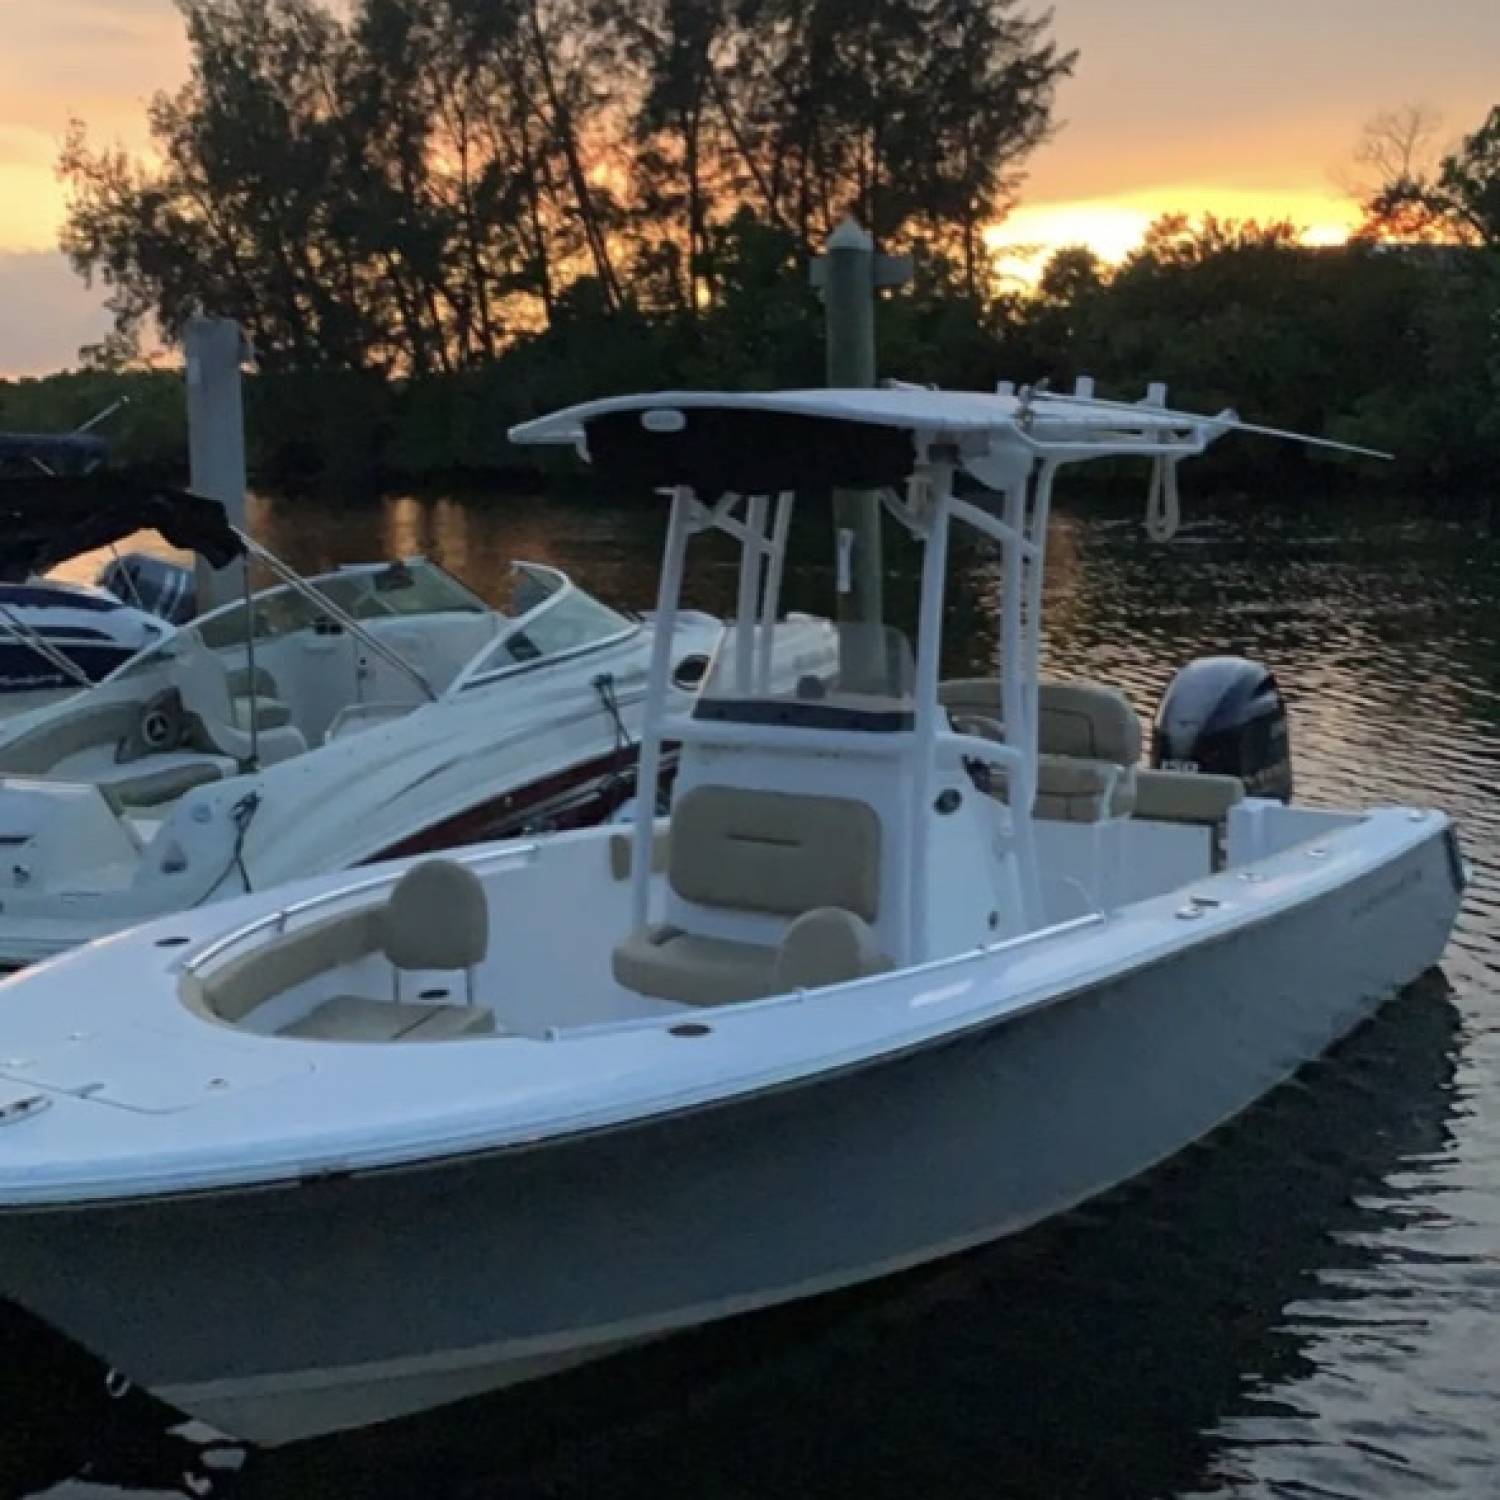 Title: Sunset Crusin - On board their Sportsman Open 212 Center Console - Location: Naples, FL. Participating in the Photo Contest #SportsmanOctober2021